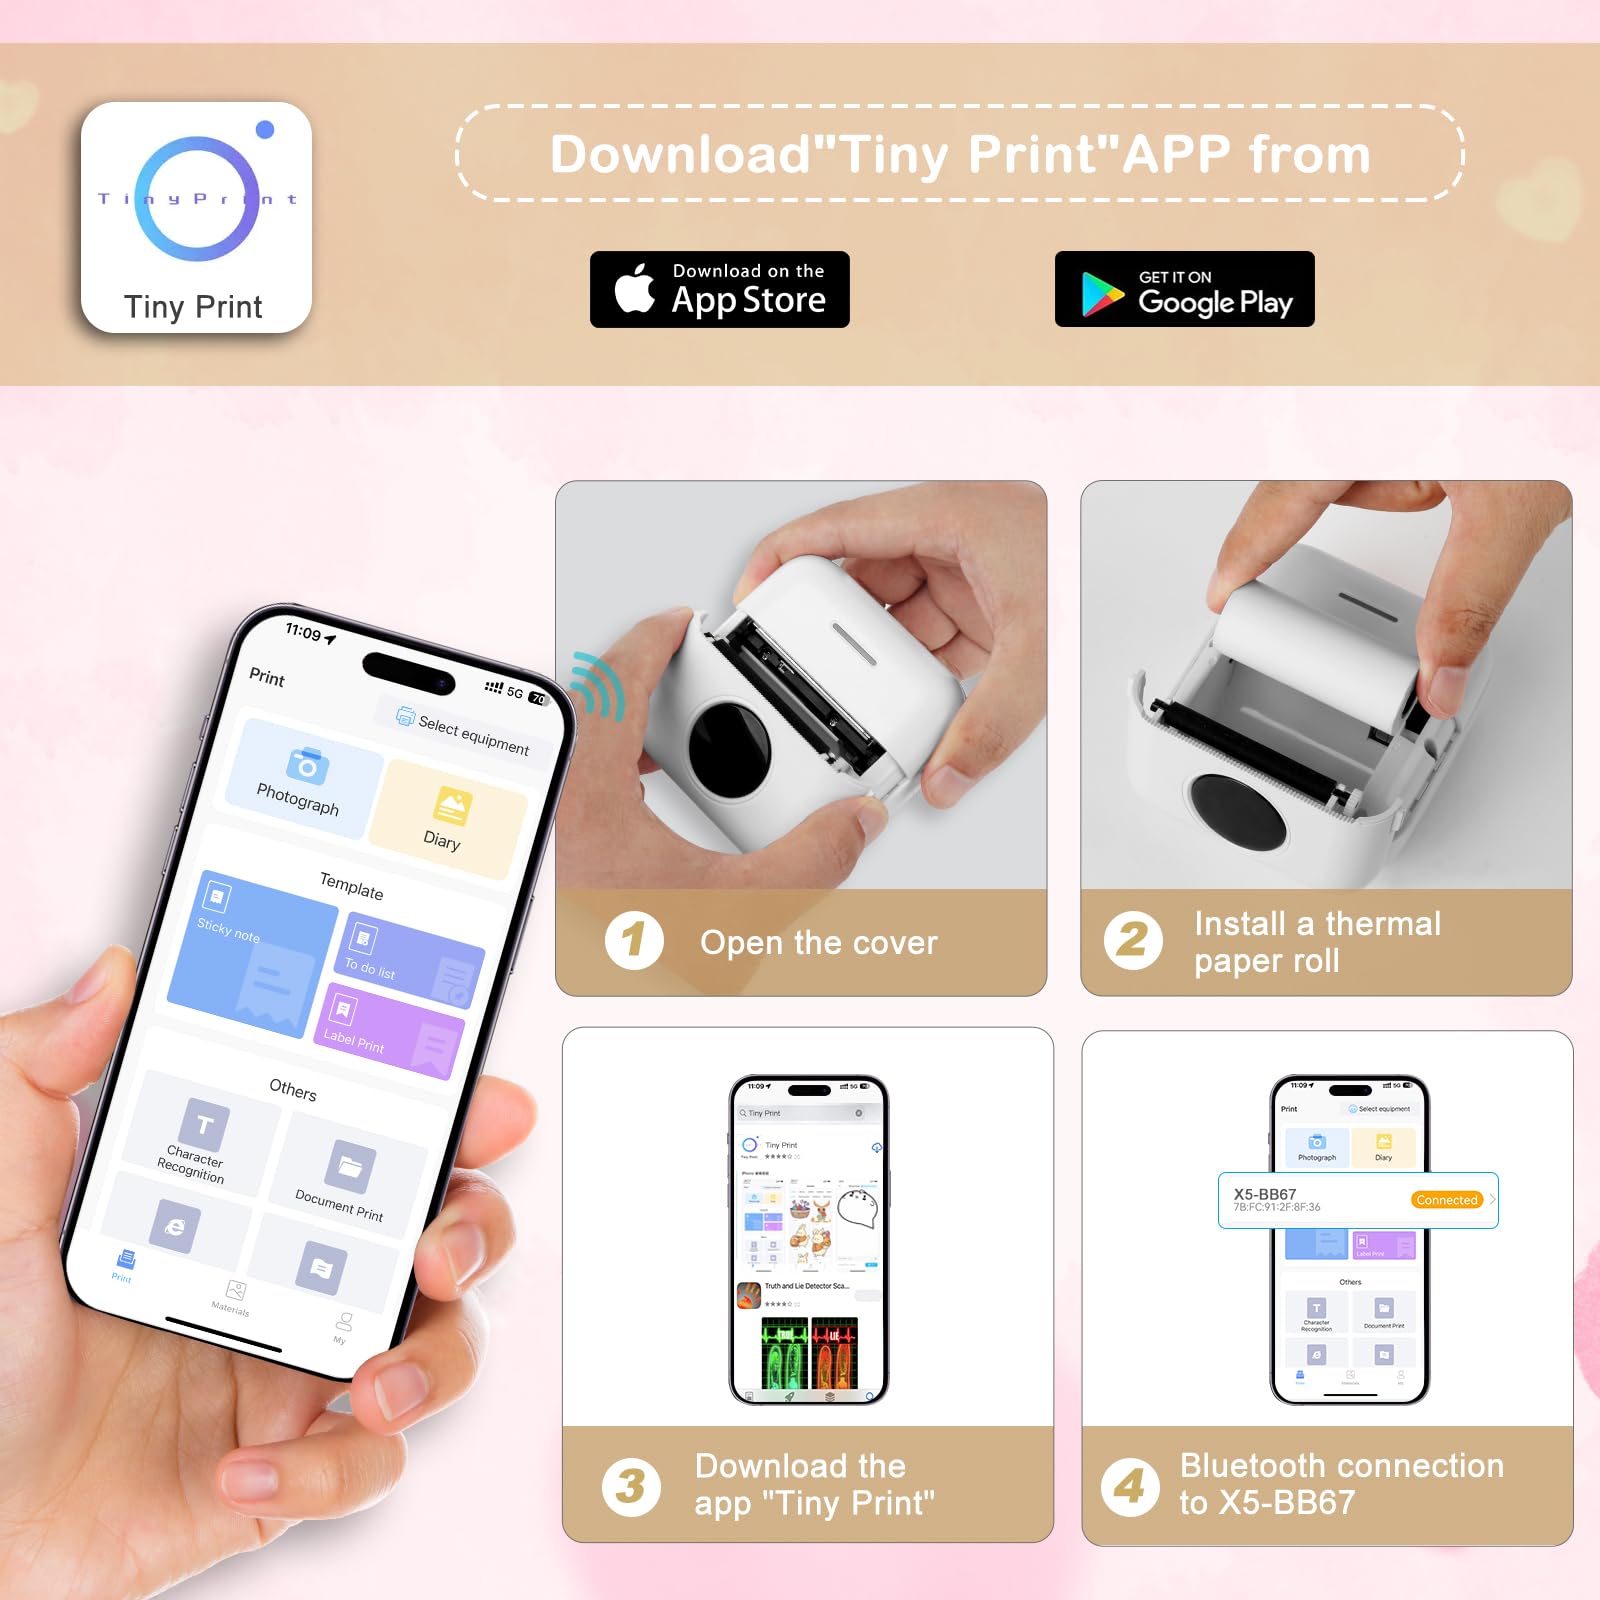 ST-CARE Mini Pocket Bluetooth Printer-Portable Thermal Printer with 5 Roll Papers for Journal/DIY Scrapbook/Travel/Notes/Lists/Label/Memo, Receipt Printer for Children Women Gifts with iOS&Android